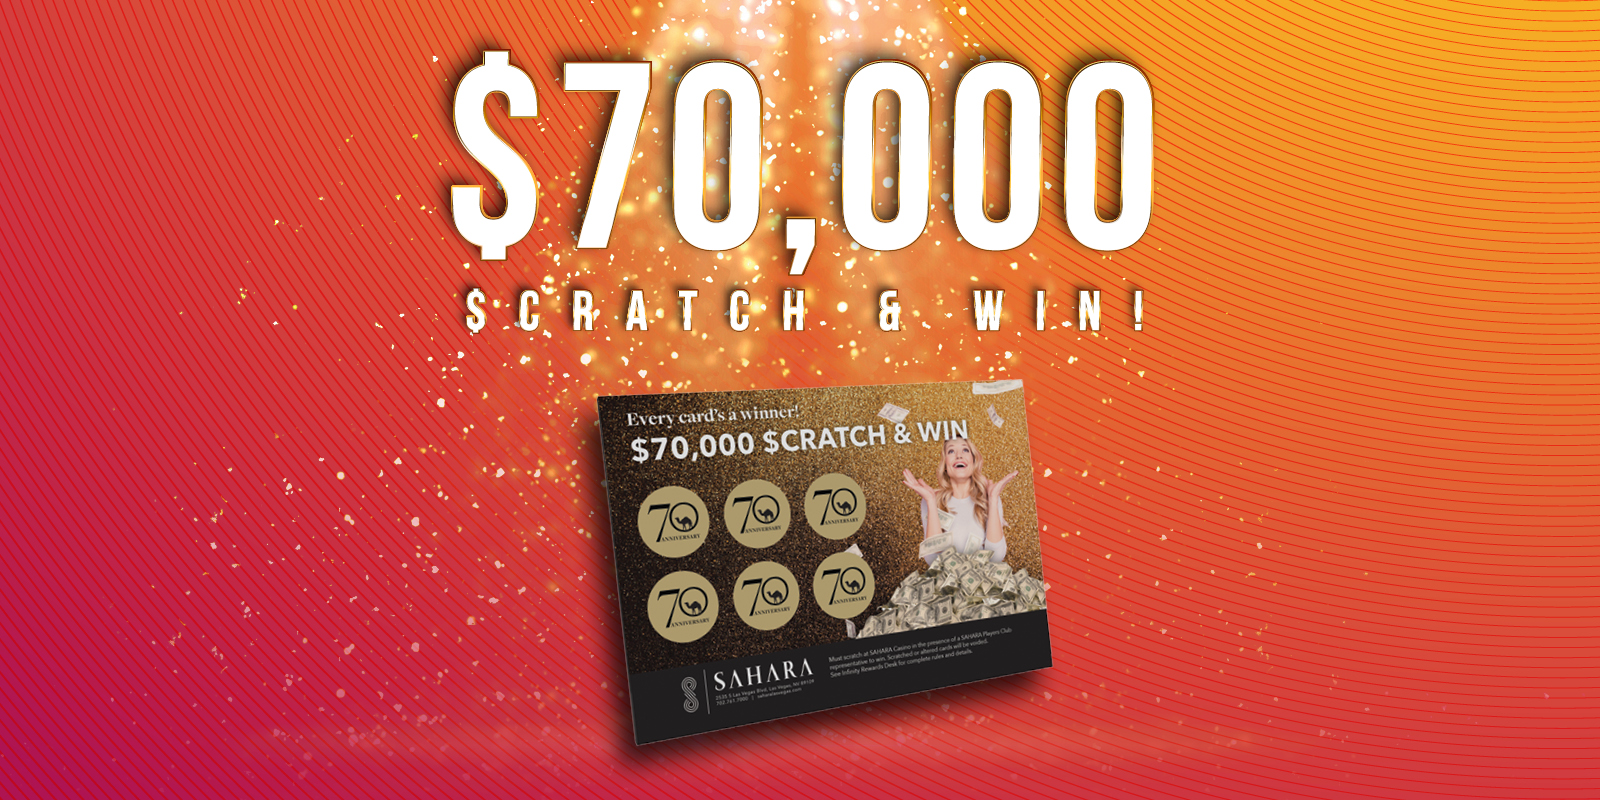 $70,000 scratch card with an orange and red gradient background